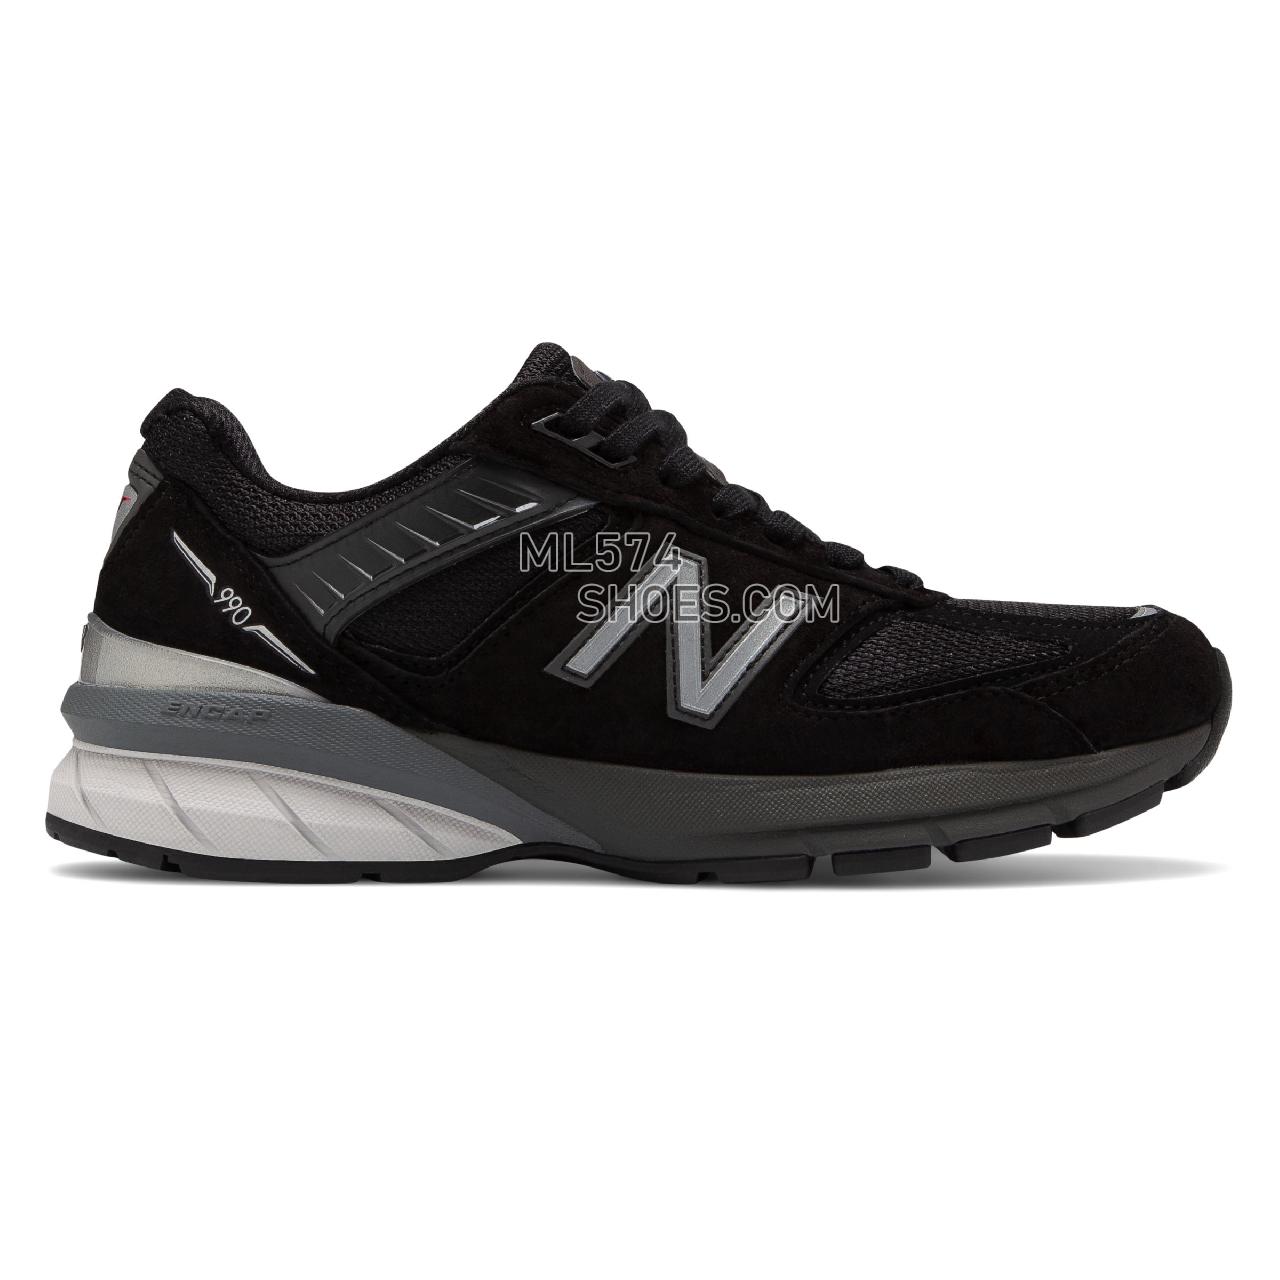 New Balance 990v5 Made in US - Women's Neutral Running - Black with Silver - W990BK5